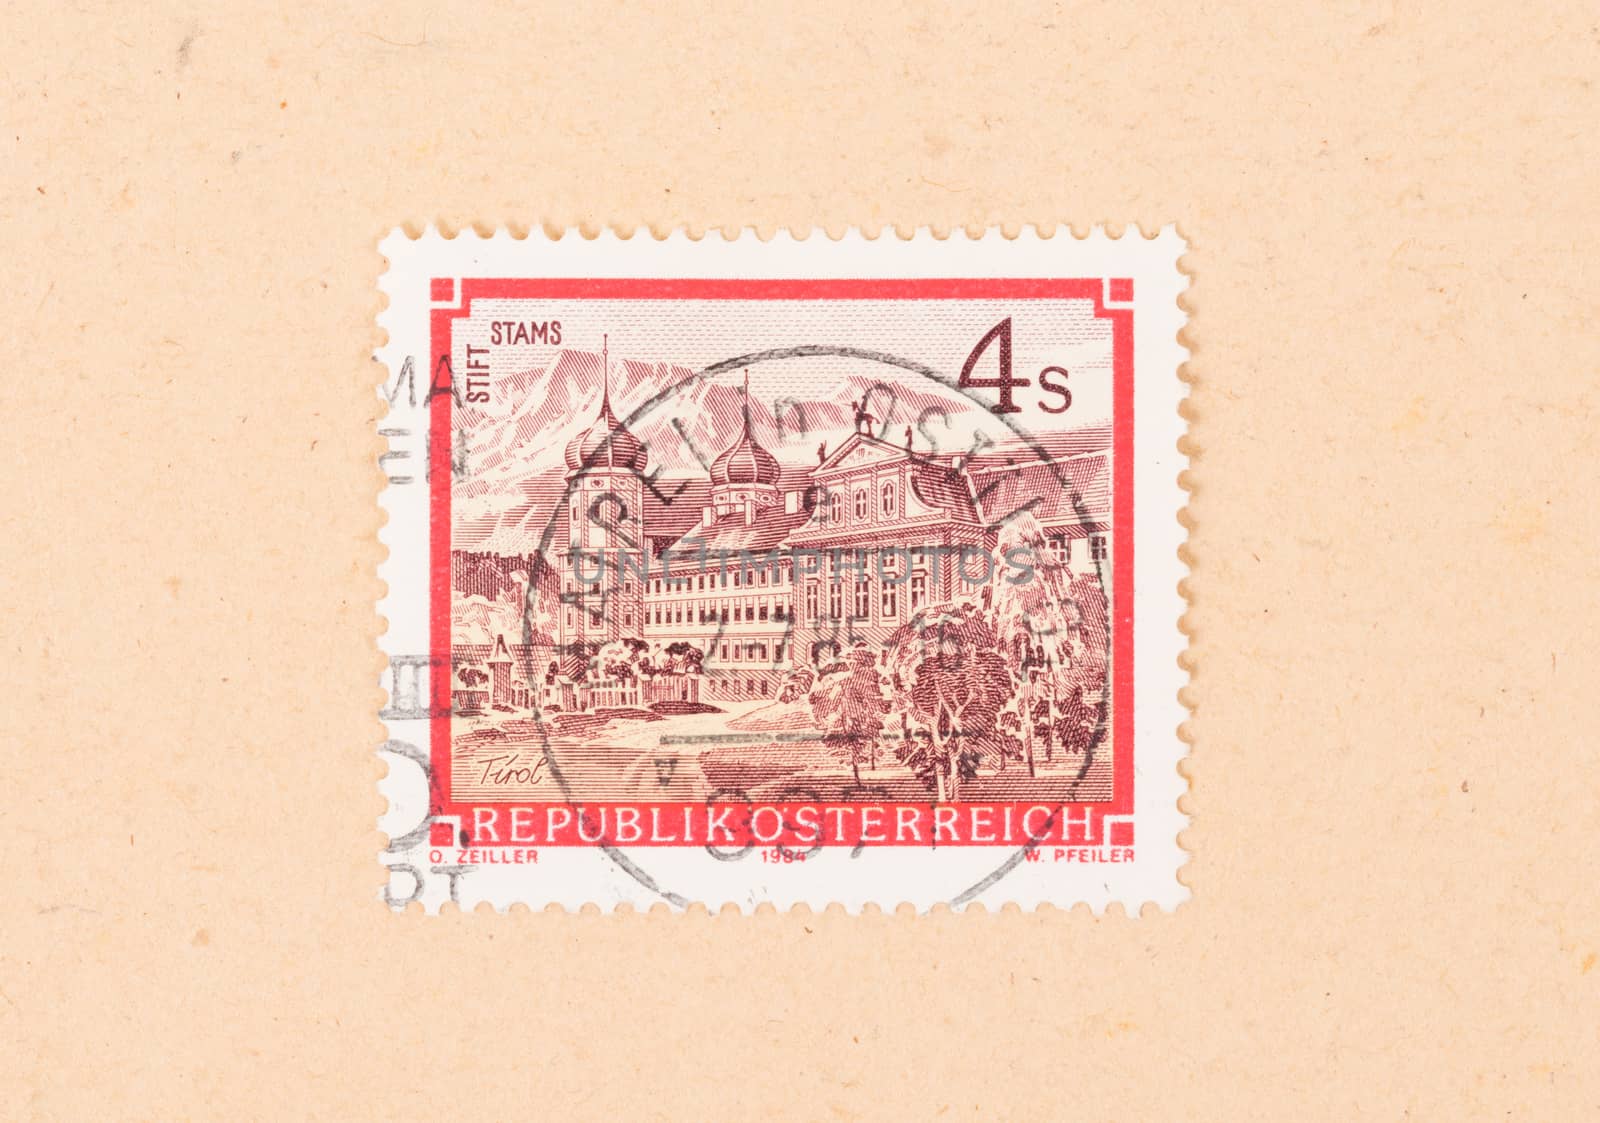 AUSTRIA - CIRCA 1984: A stamp printed in Austria shows Stams abb by michaklootwijk